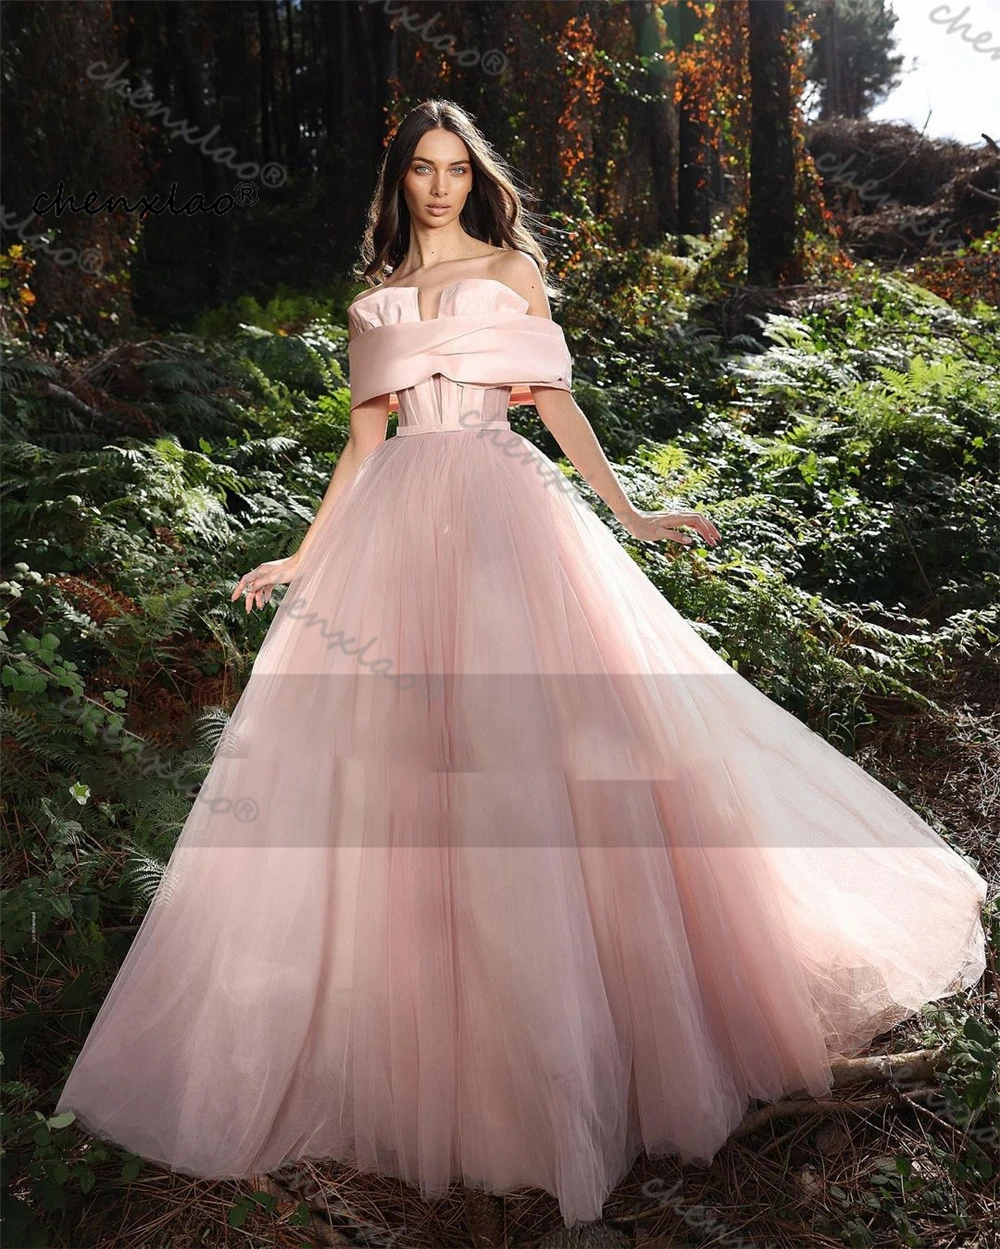 

Chenxiao Simple Pink Tulle Prom Dresses Long Satin Off The Shoulder Formal Evening Gowns Women Special Occasion Dress 2022